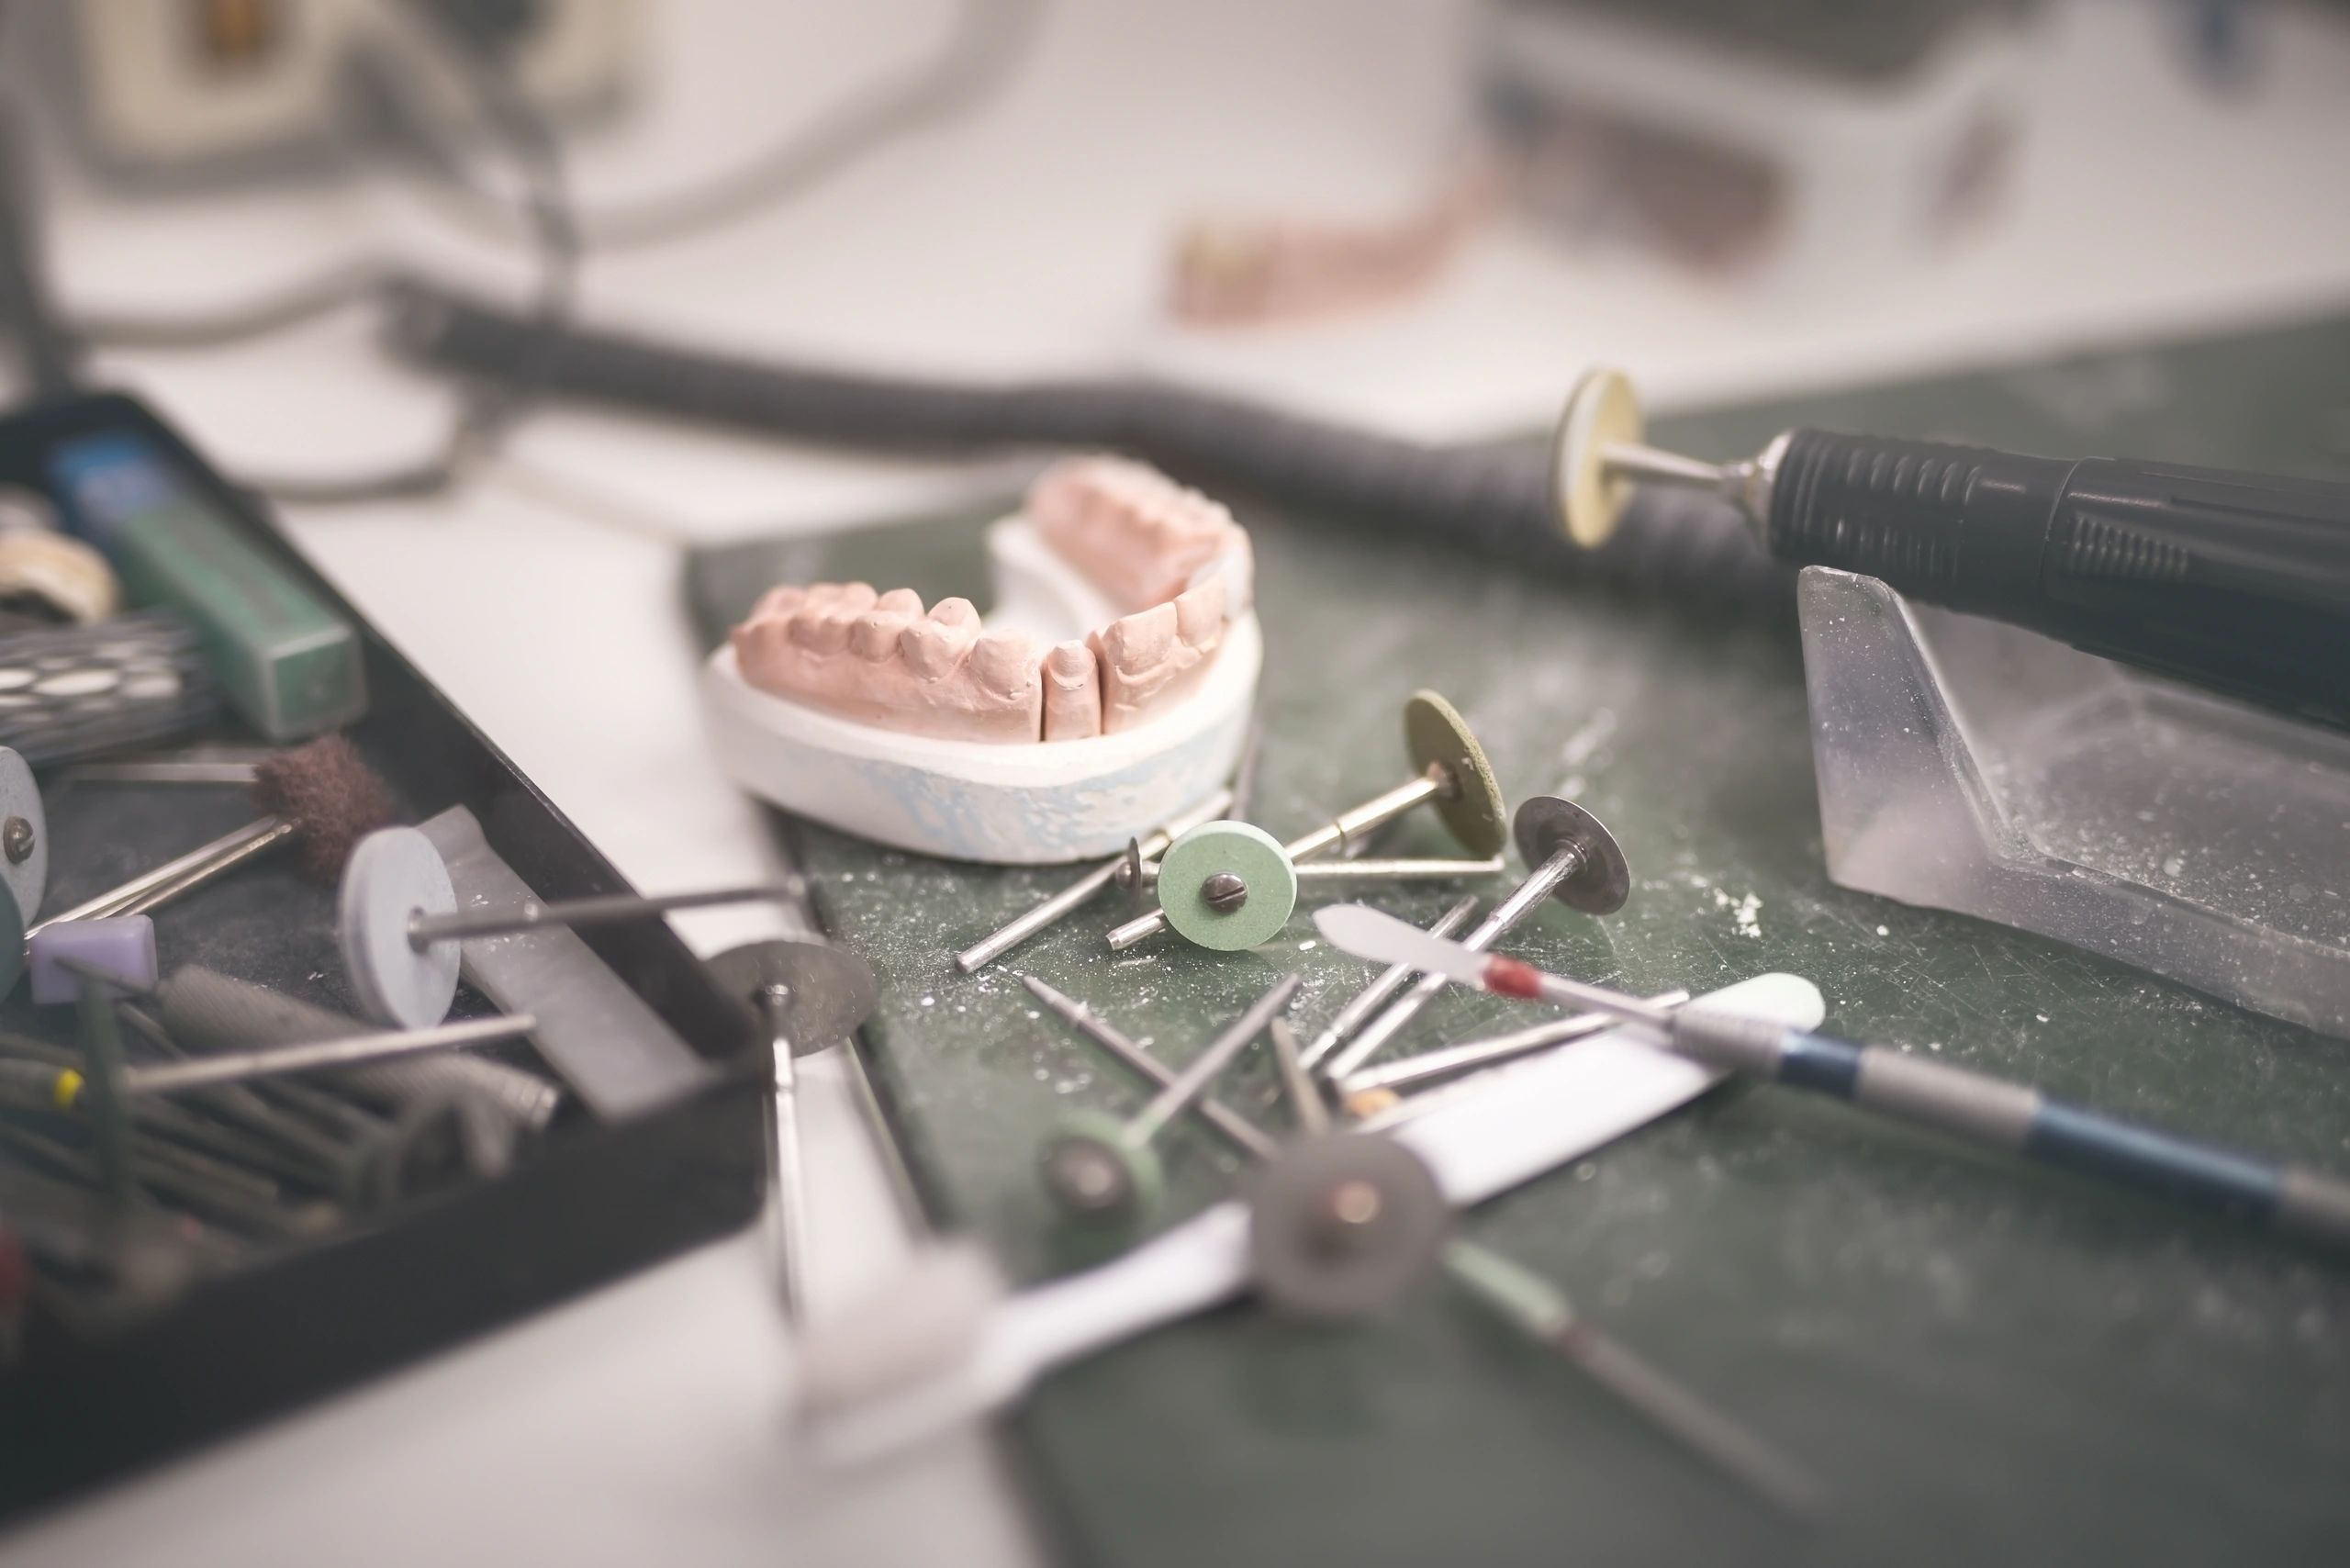 Dental Prosthesis. Artificial tooth being done by a dental prosthesis specialist.